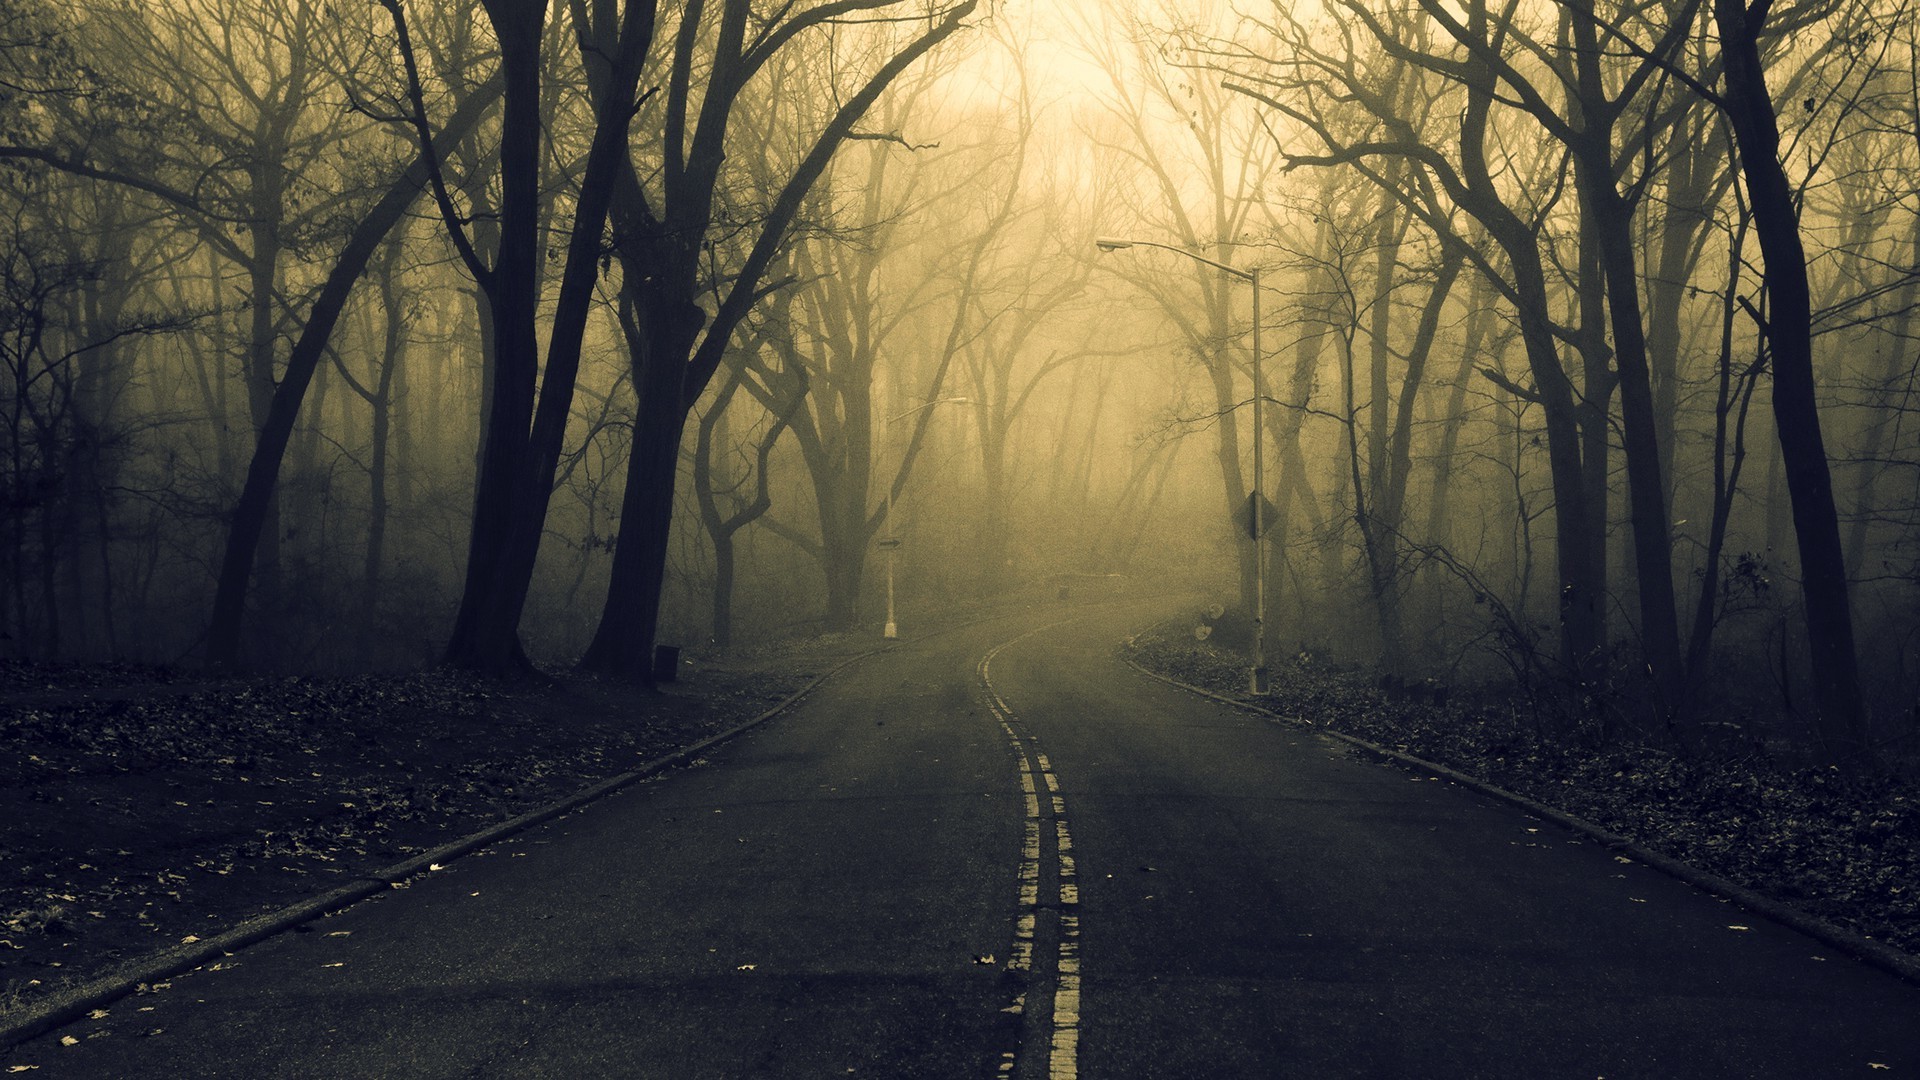 Road Forest Spooky Wallpapers Hd Desktop And Mobile Backgrounds